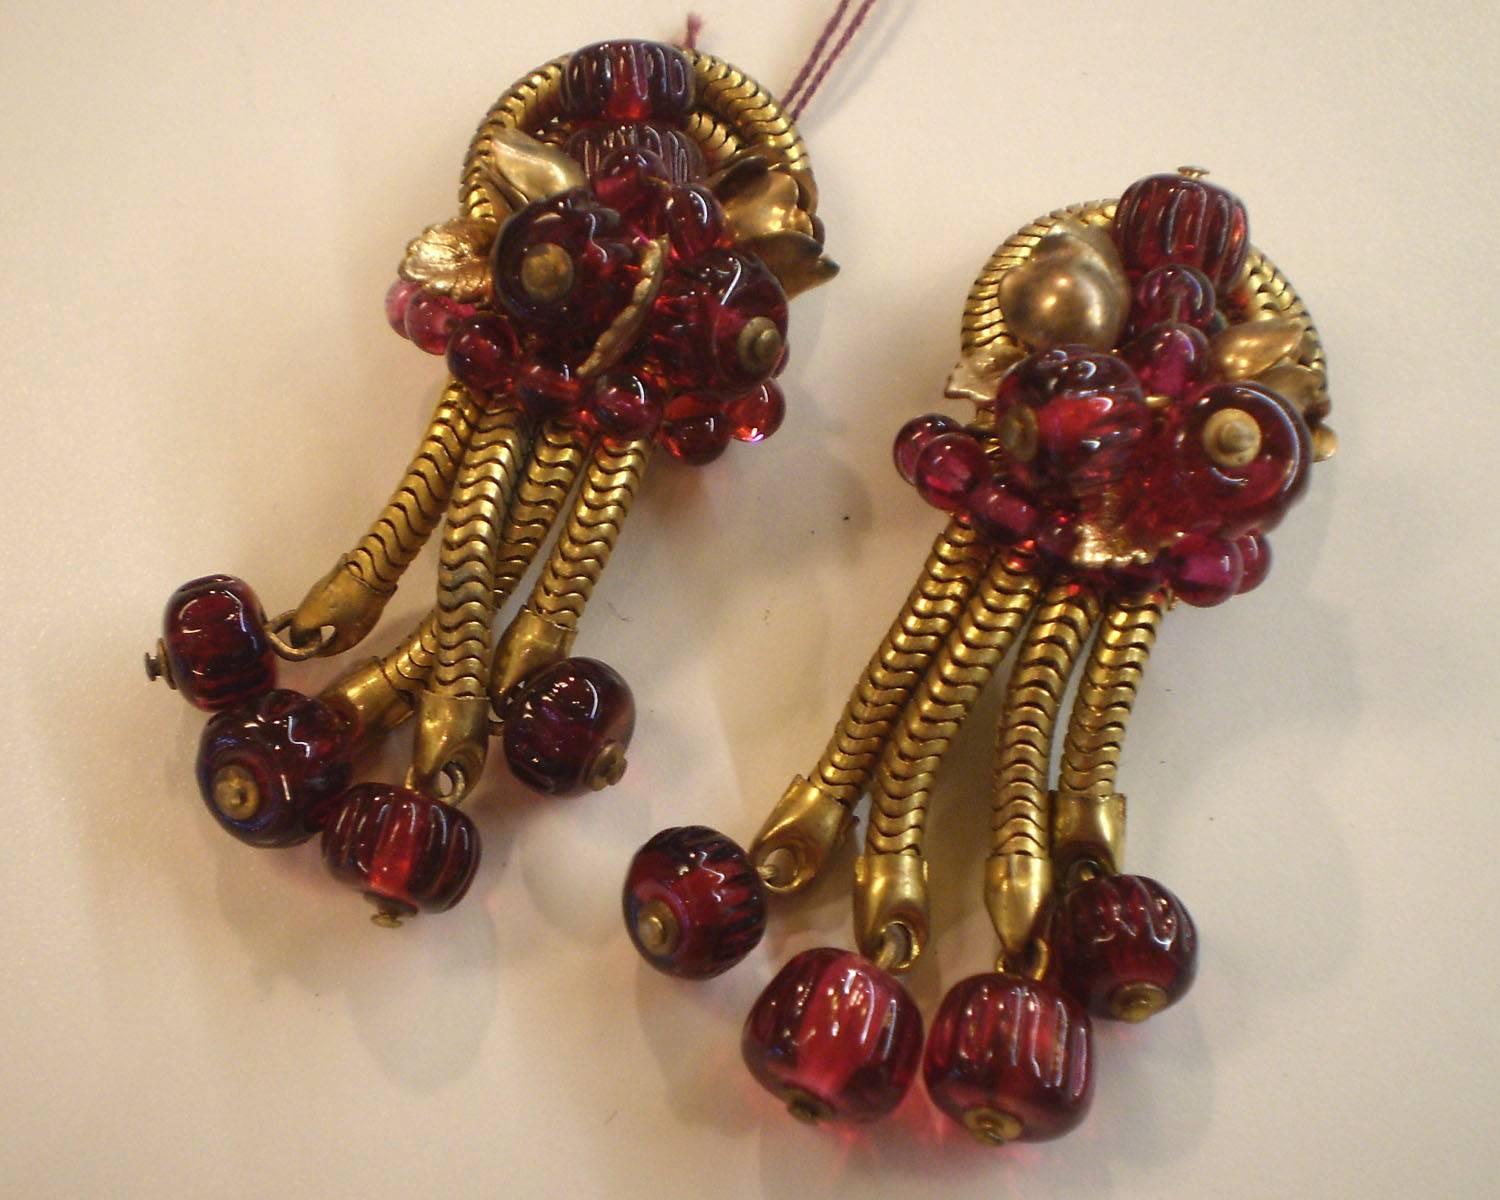 These 1960's Robert Rousselet Cranberry Gripoix Glass and Goldtone Drop Earrings are very much in the style of Coco Chanel. Marked FRANCE and with appropriate french earring clipback hardware, these elegant moderne yet glamorous translucent carved